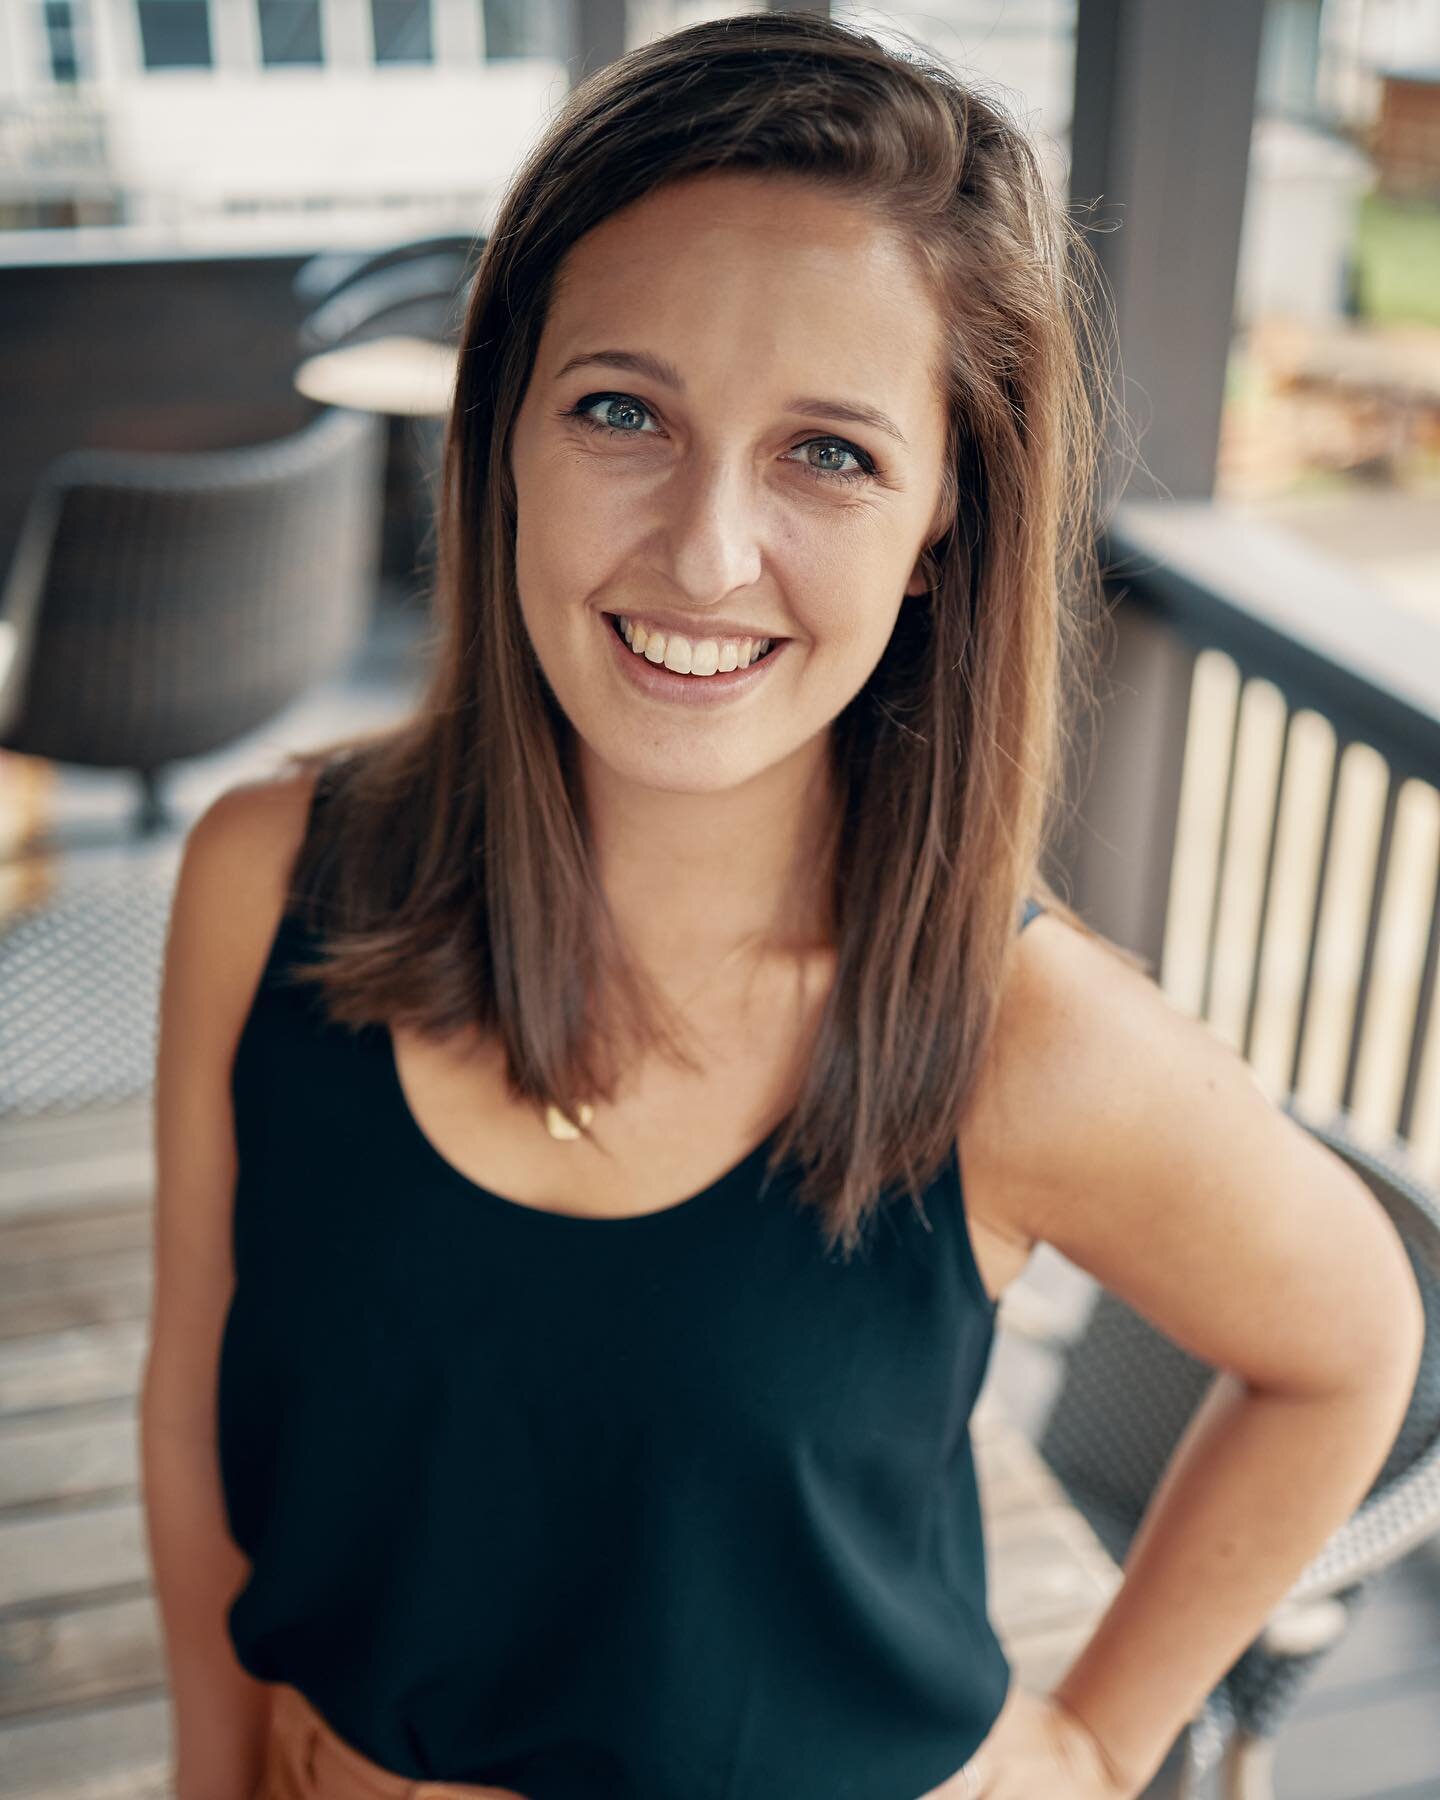 10 whole years of @kelseygranda at Creative Nation‼️She may have started as the intern, but now she is the glue, the Swiss Army knife, the question answerer, the problem solver, and the one that keeps us all on track! There&rsquo;s a lot of behind th